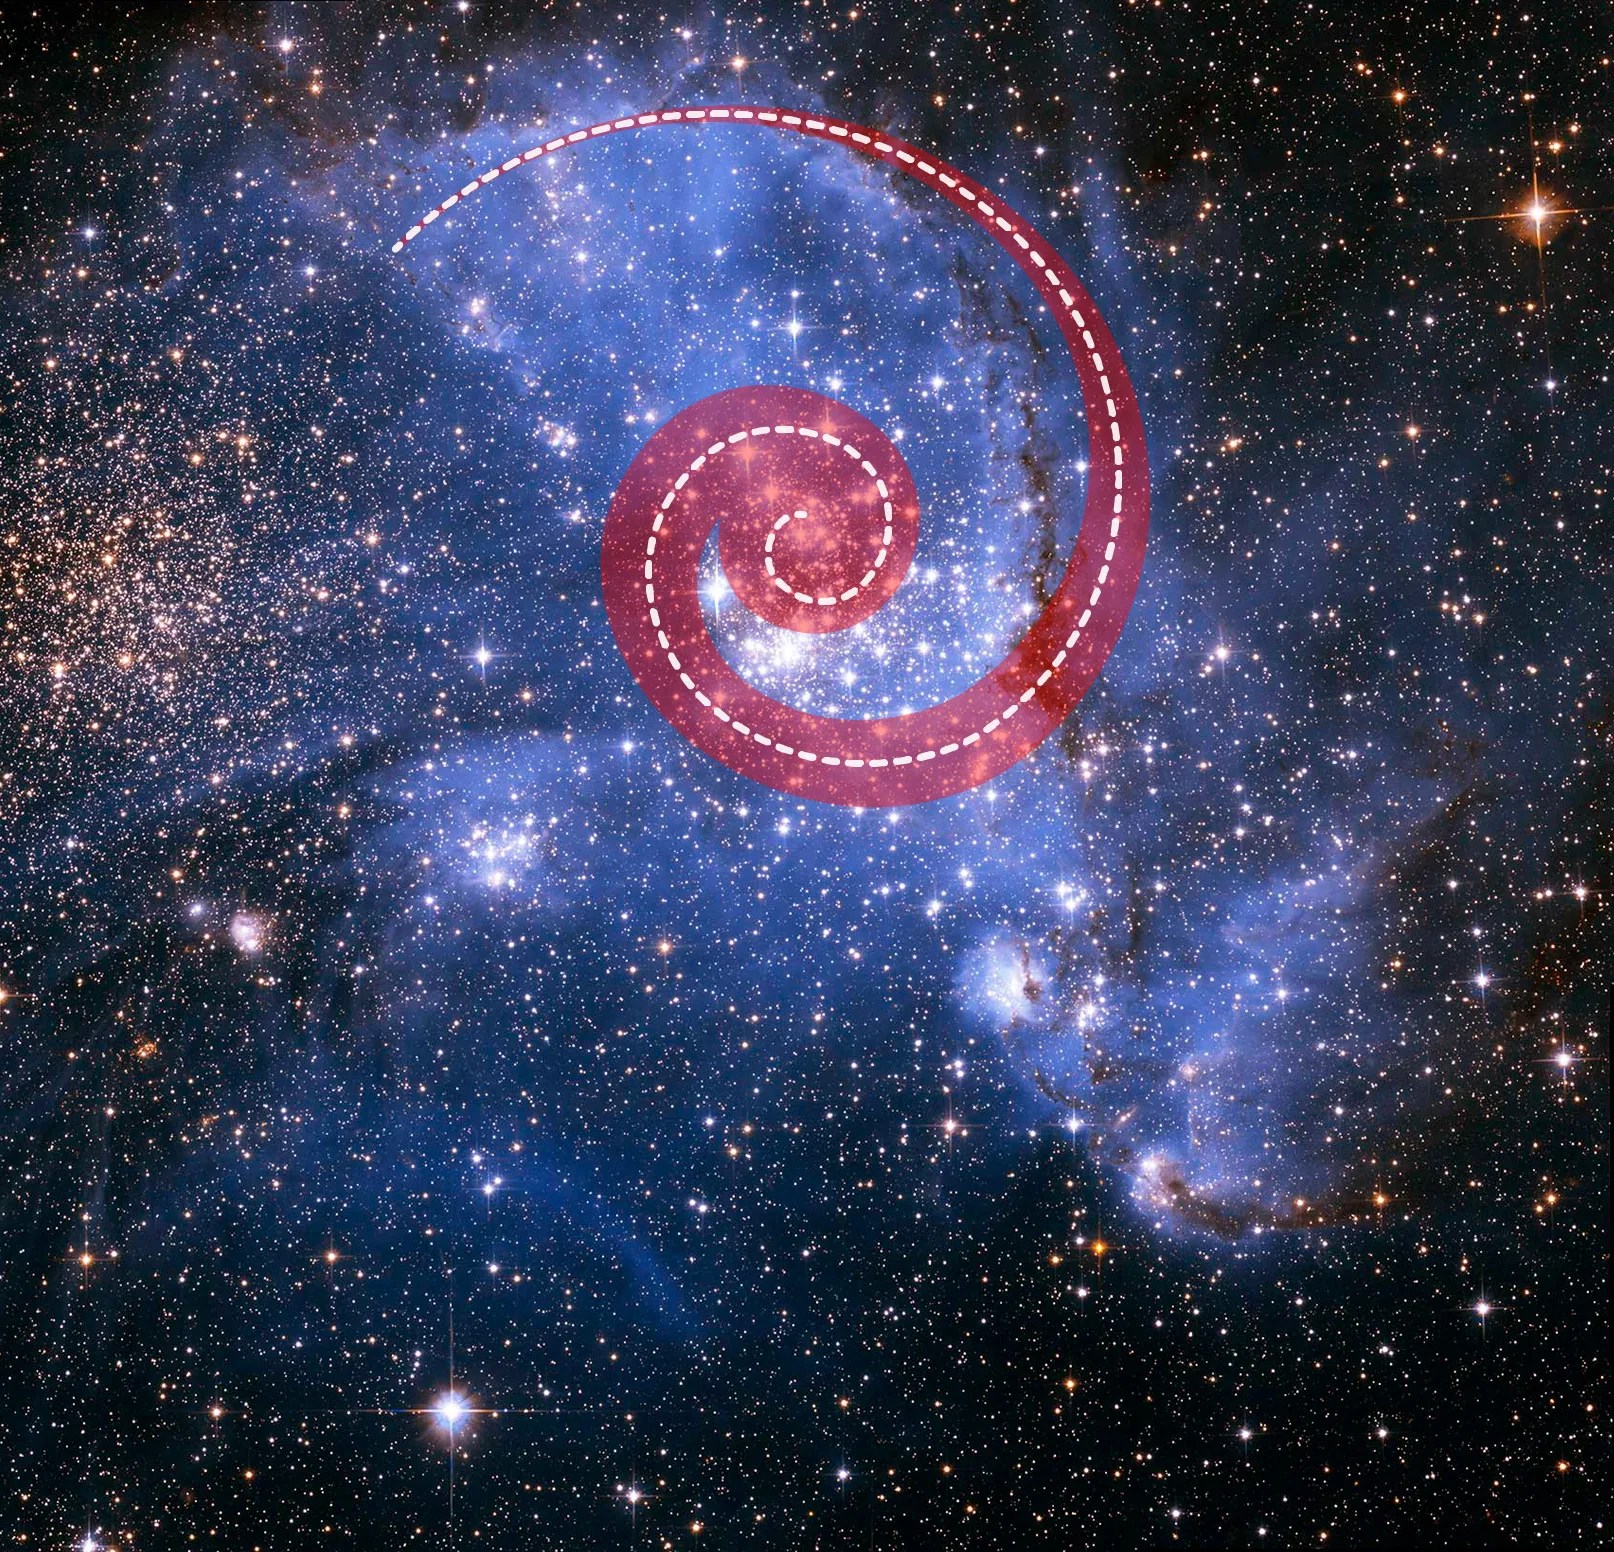 Bright-white stars in a cloud of blue. Superimposed on the scene is a red spiral.